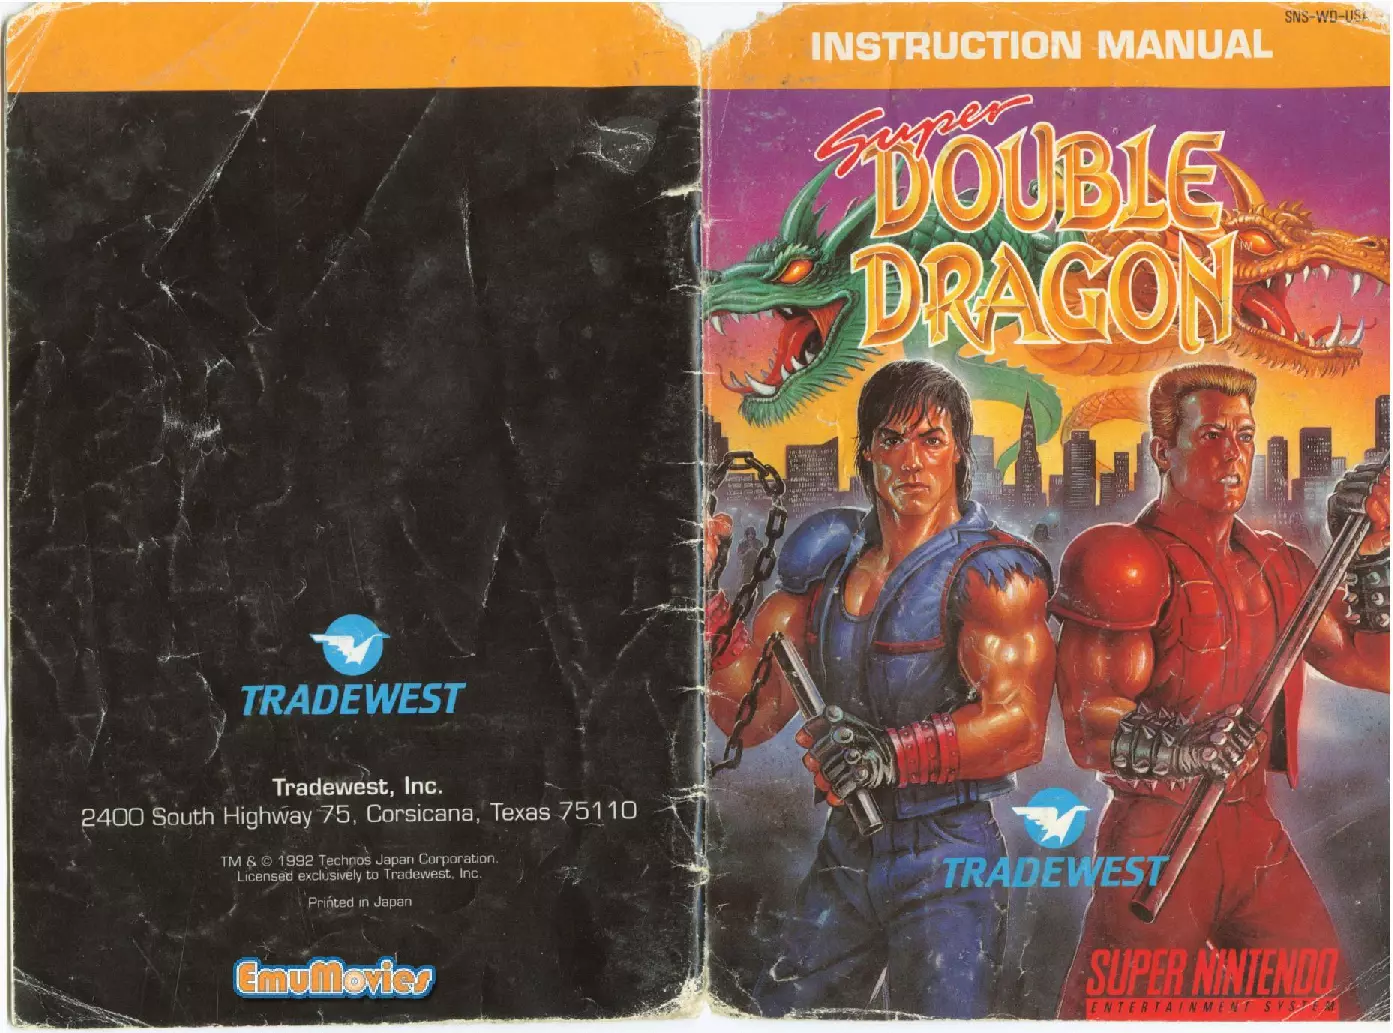 manual for Super Double Dragon